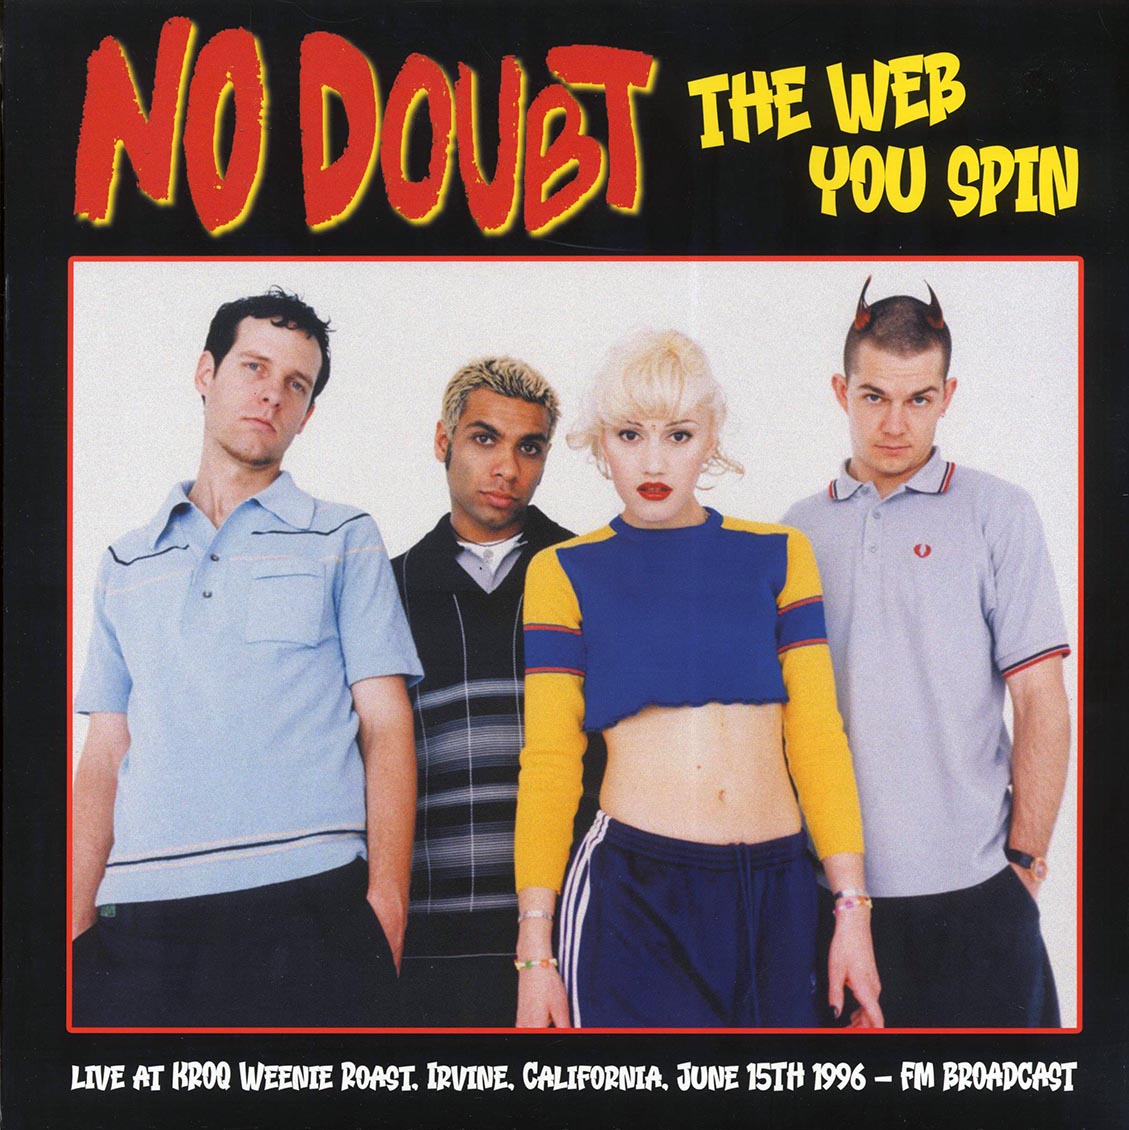 No Doubt - The Web You Spin: Live At KROZ Weenie Roast, Irvine, California, June 15th 1996 - Vinyl LP